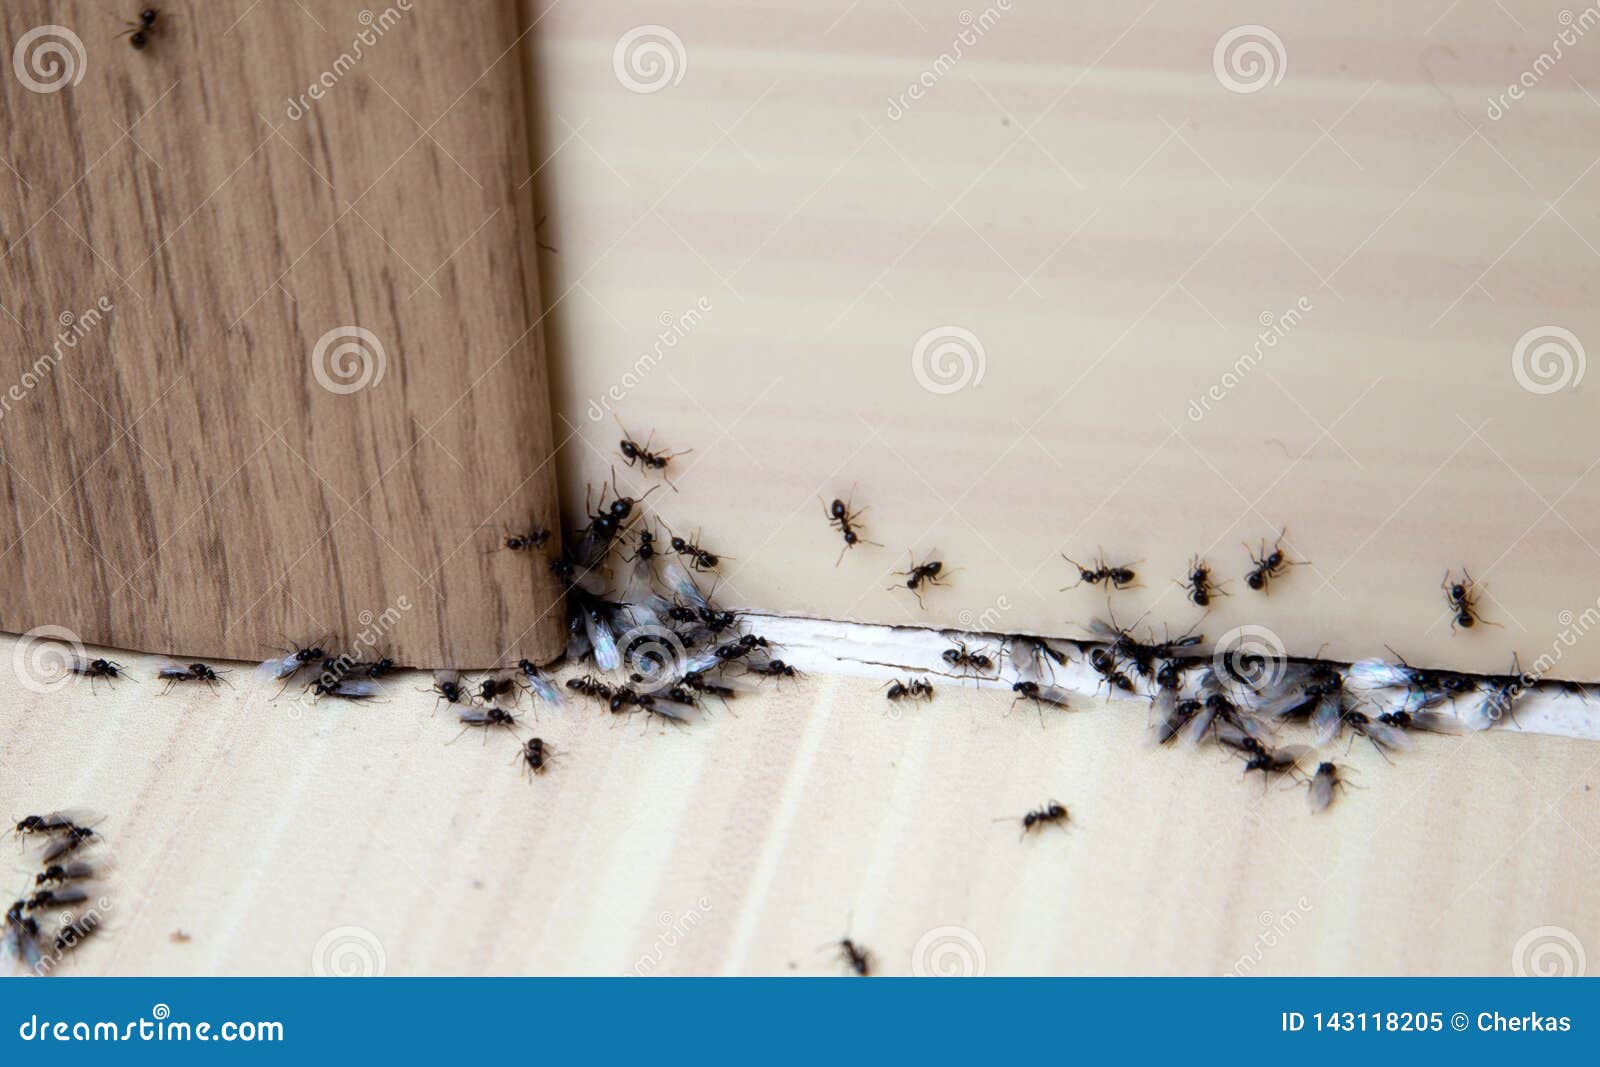 ants in the house